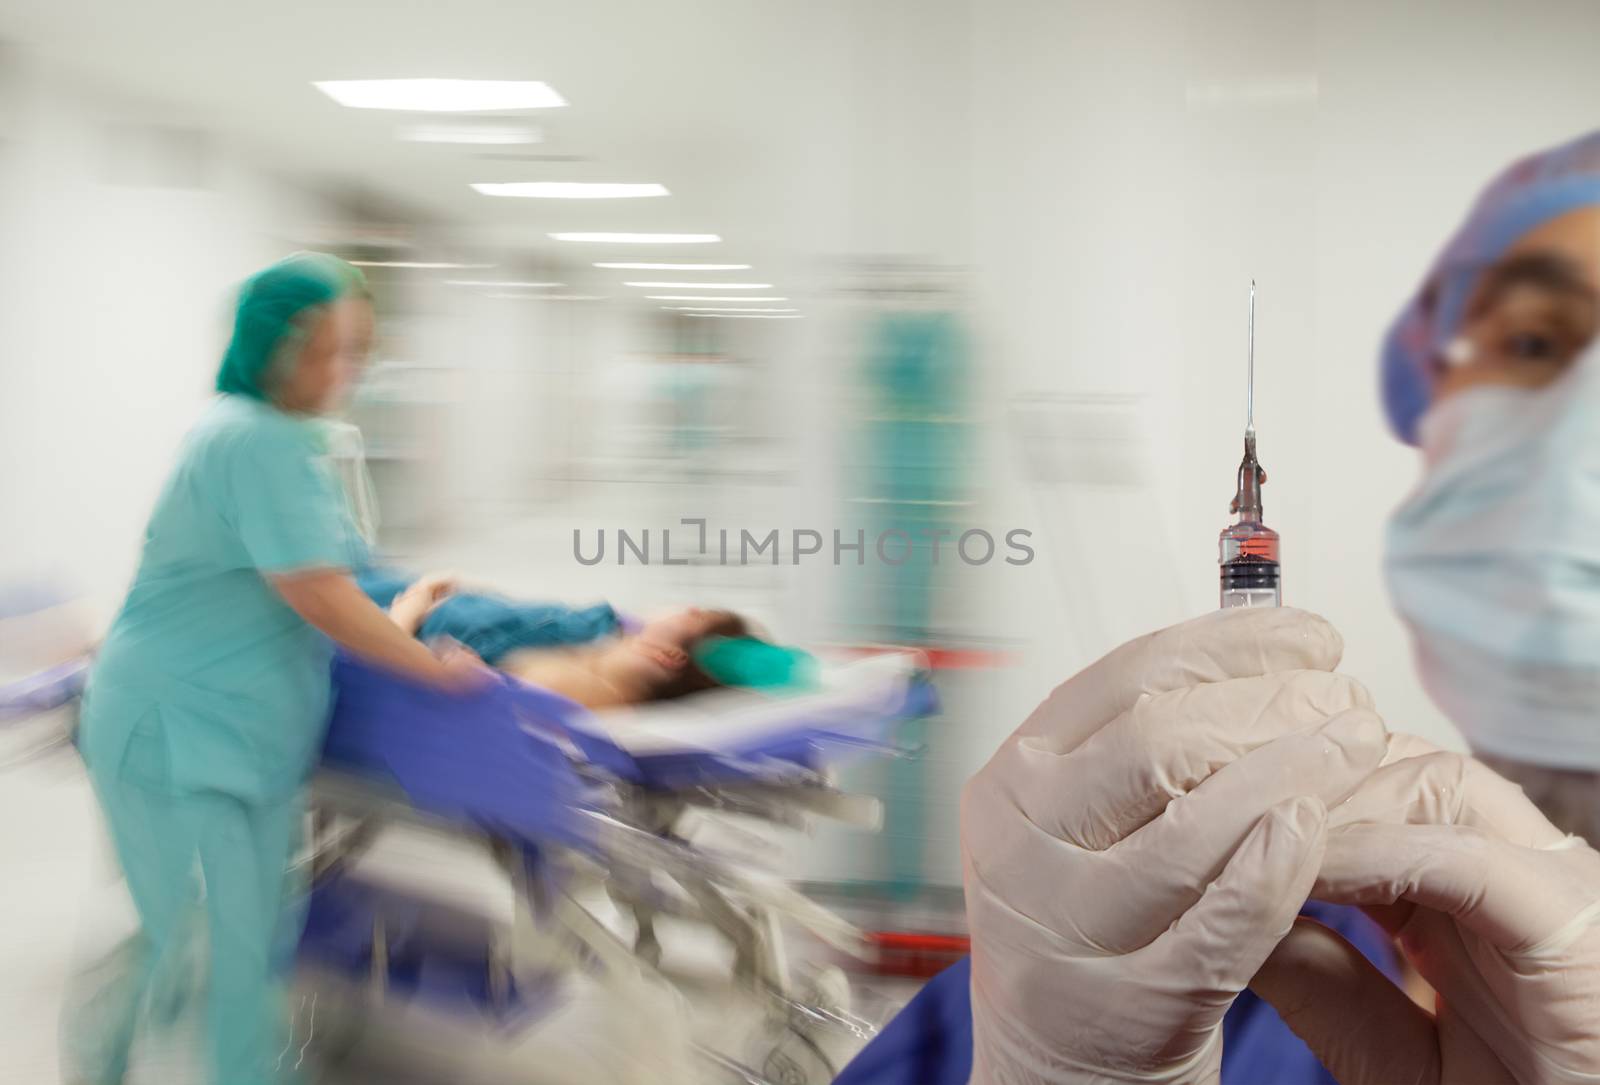 A doctor with syringe and gloves over motion blurred background of nurse in hurry pushing litter down a sterile light hospital corridor.